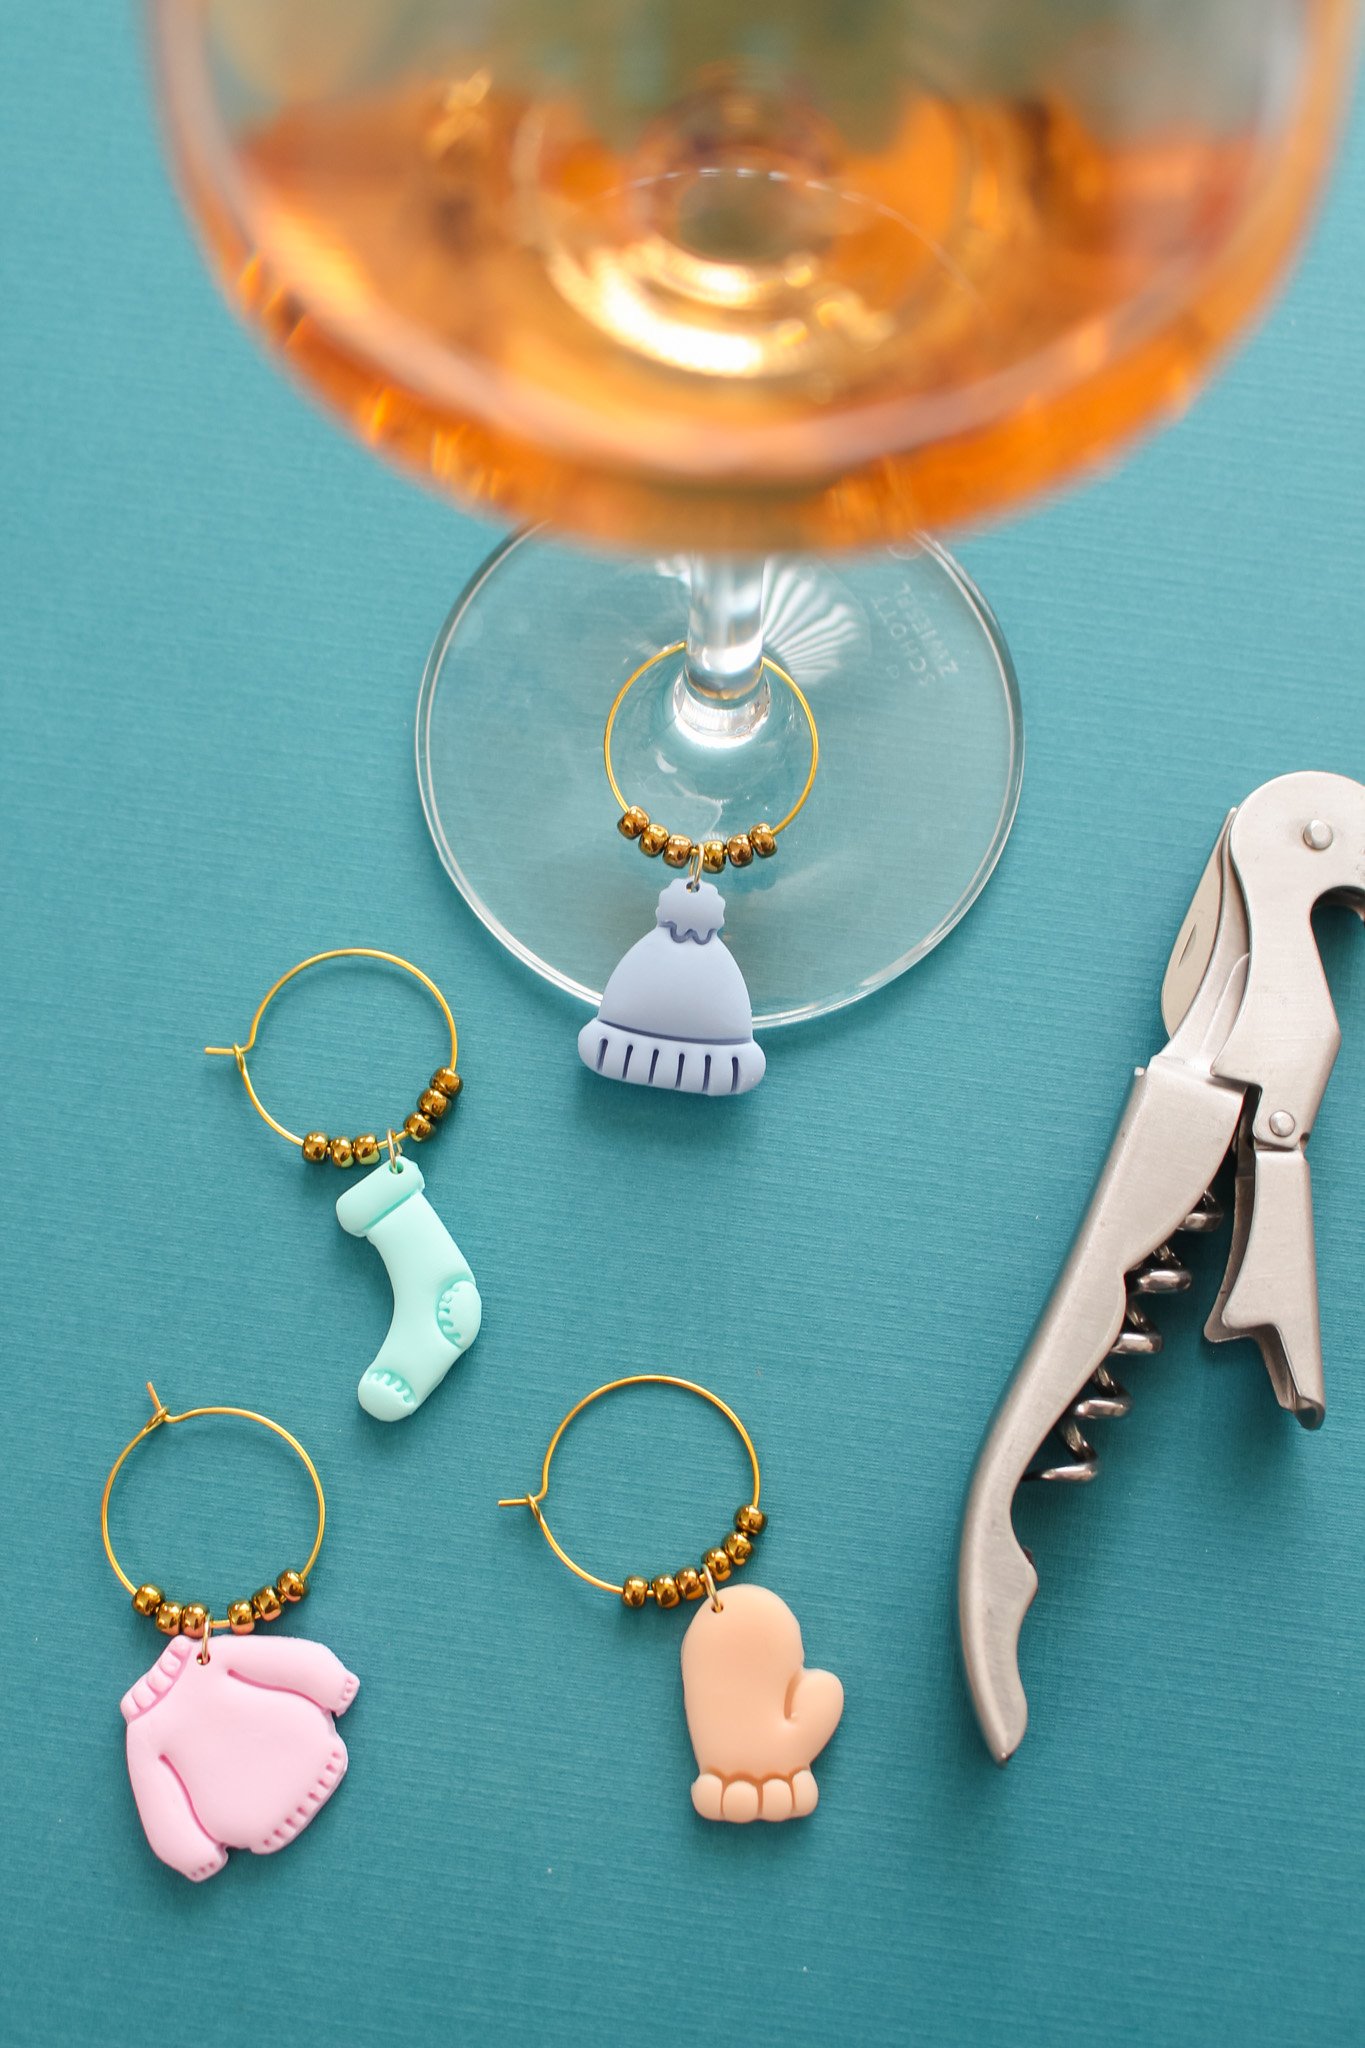 DIY Champagne Party Favors - Fashionable Hostess